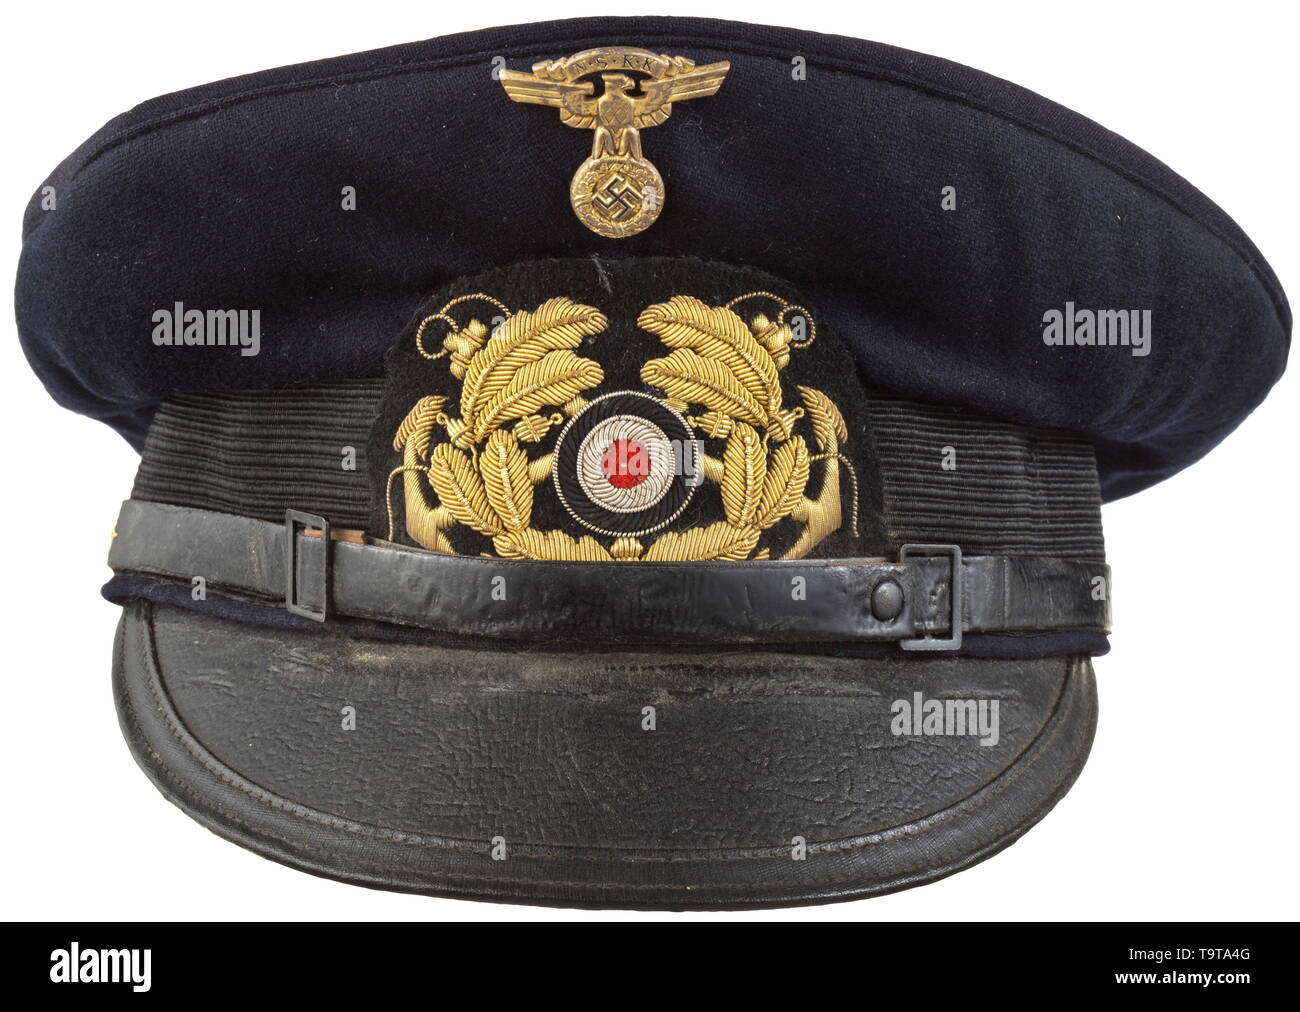 A visor cap for members of NSKK motor boat units private purchase piece historic, historical, 20th century, Additional-Rights-Clearance-Info-Not-Available Stock Photo